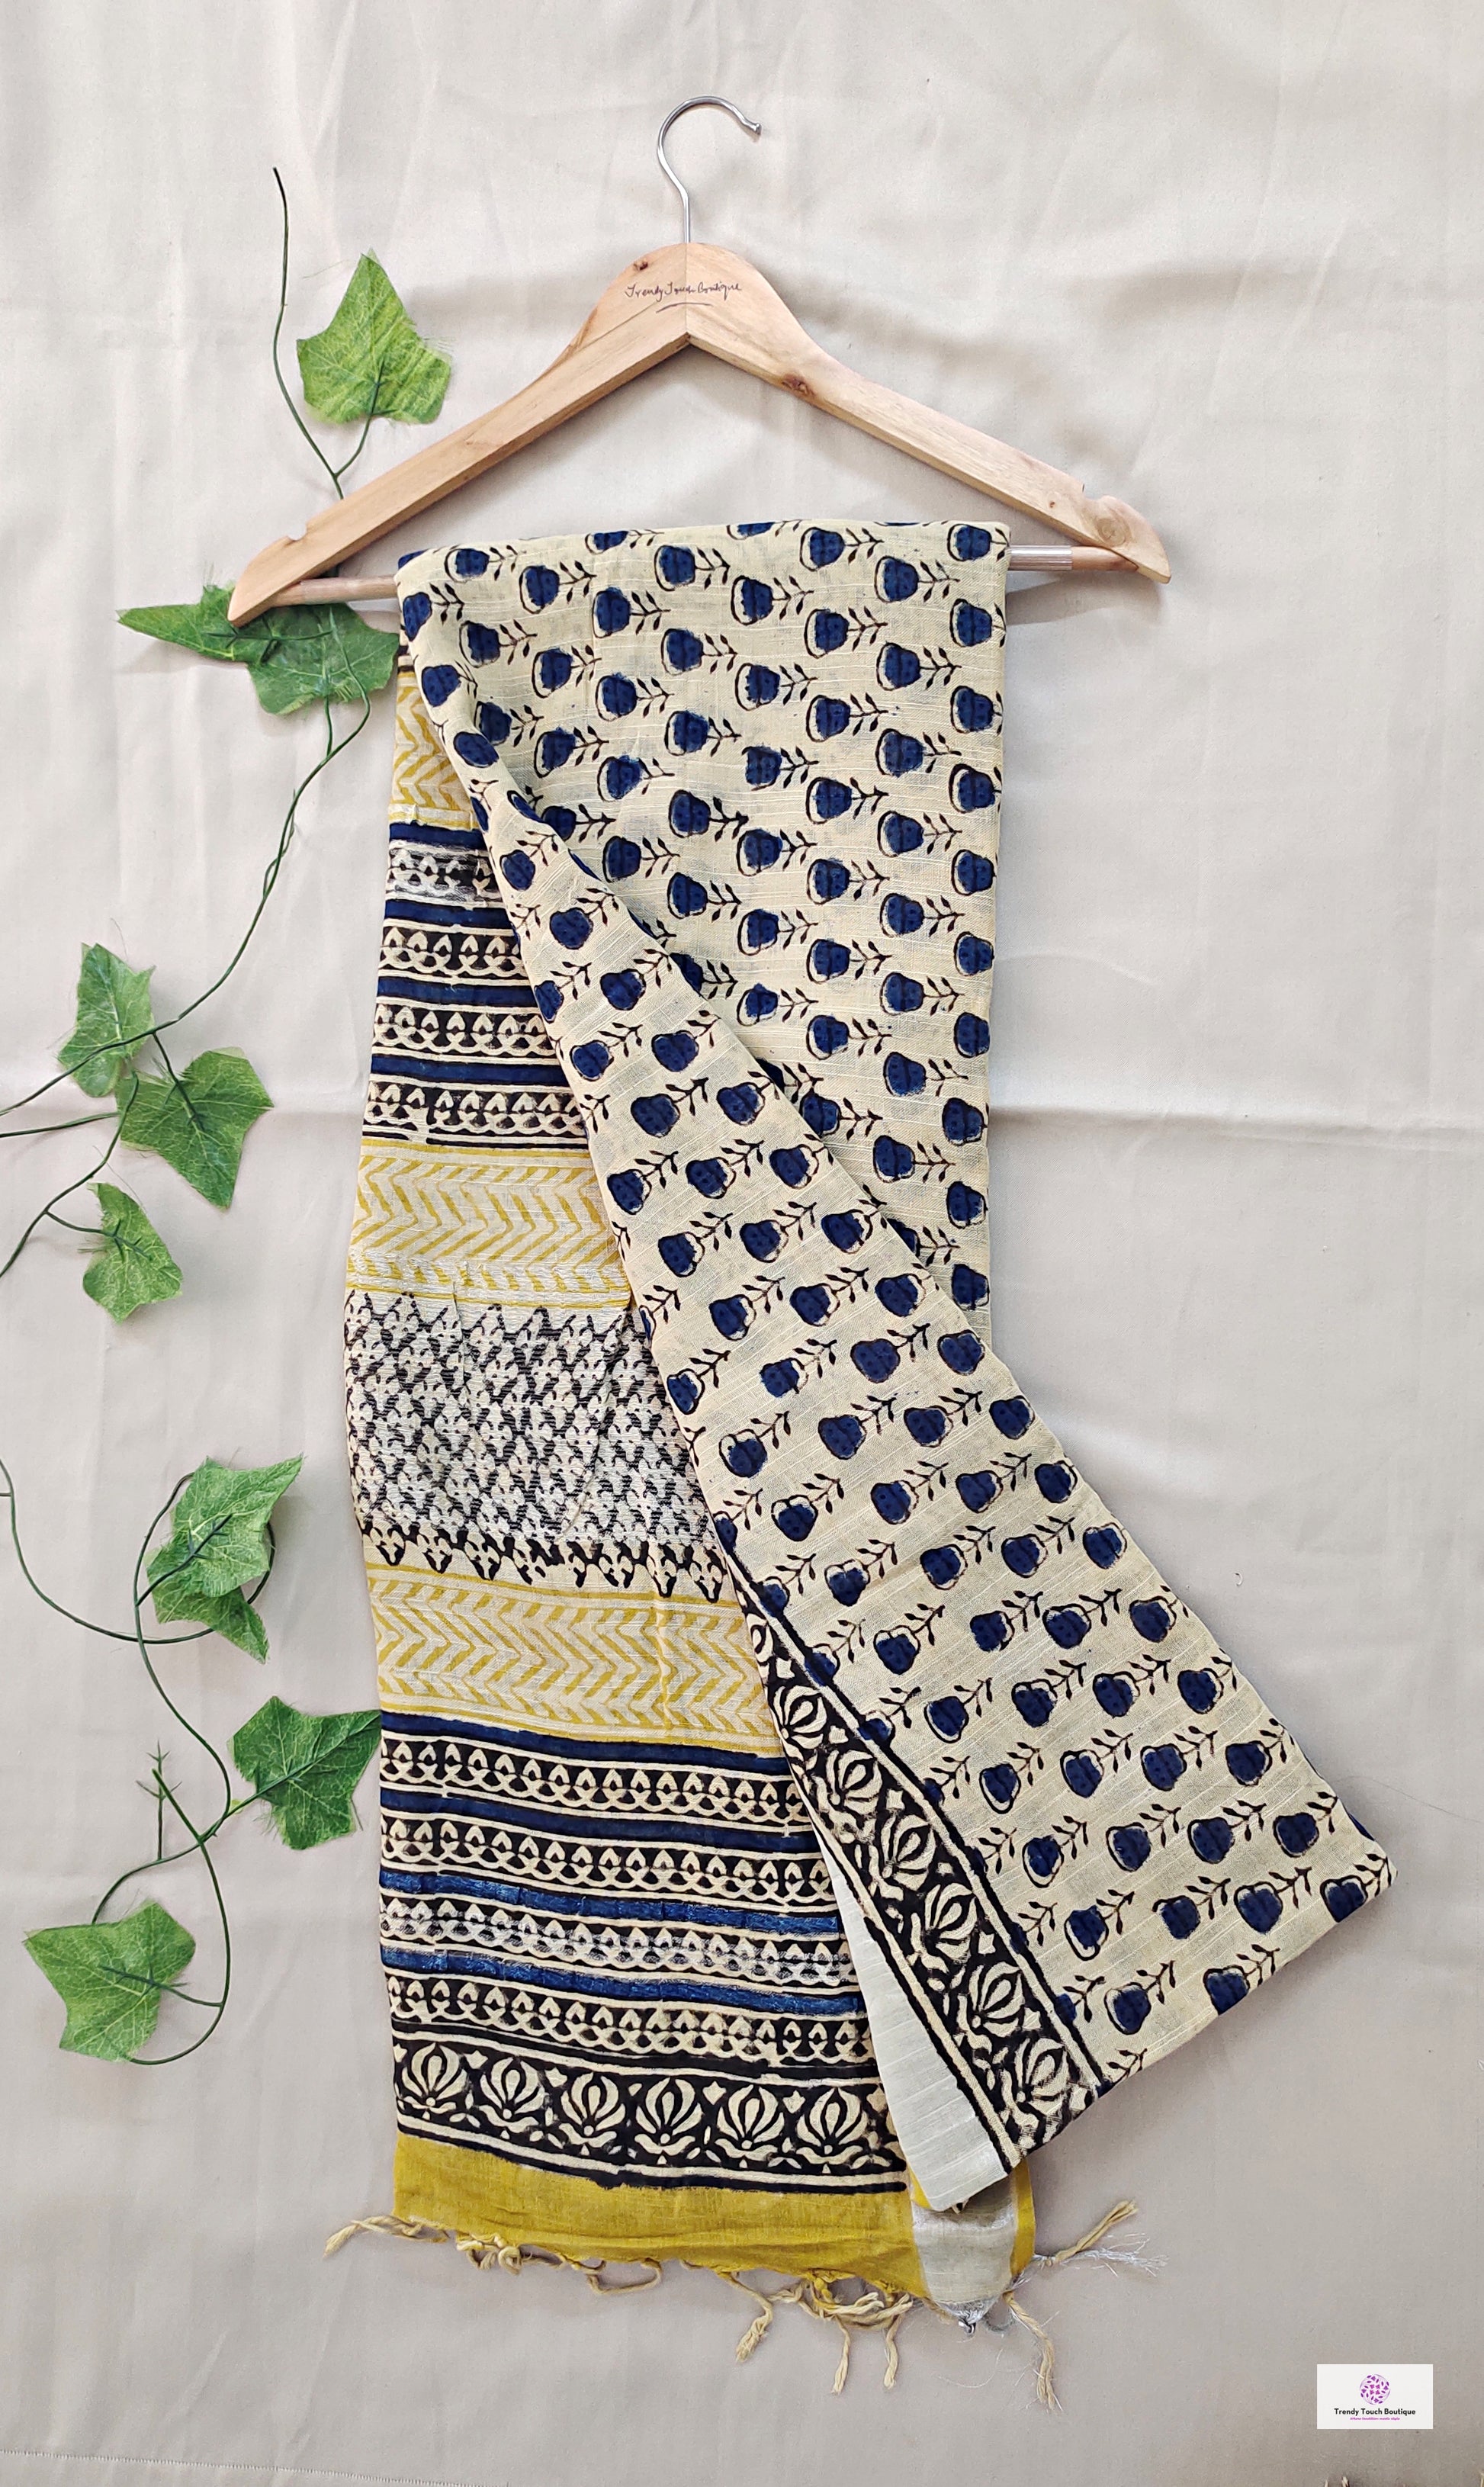  best summer handwoven handloom fabric handblock print organic slub linen saree yellow blue color at best price online with blouse piece for office wear or everyday styling!